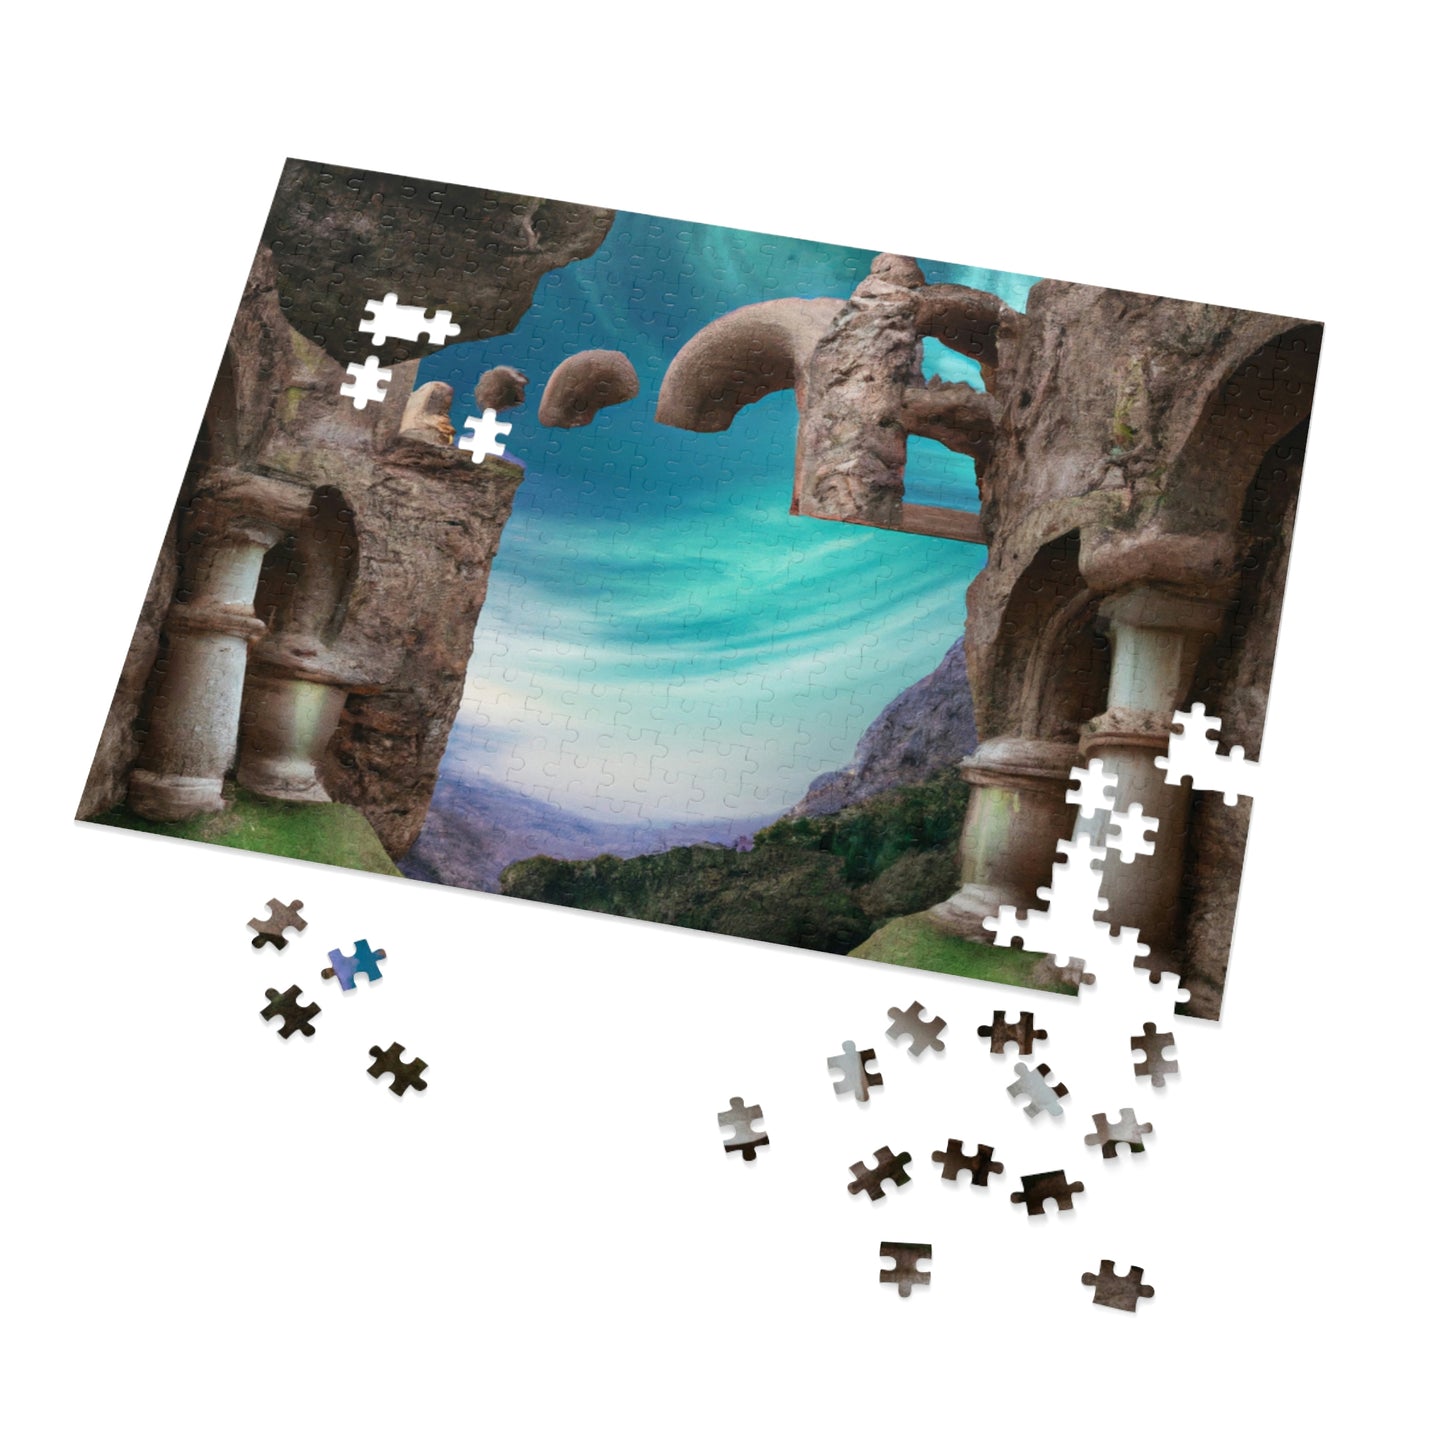 "The Forgotten Valley: Lost in the Ancients" - The Alien Jigsaw Puzzle